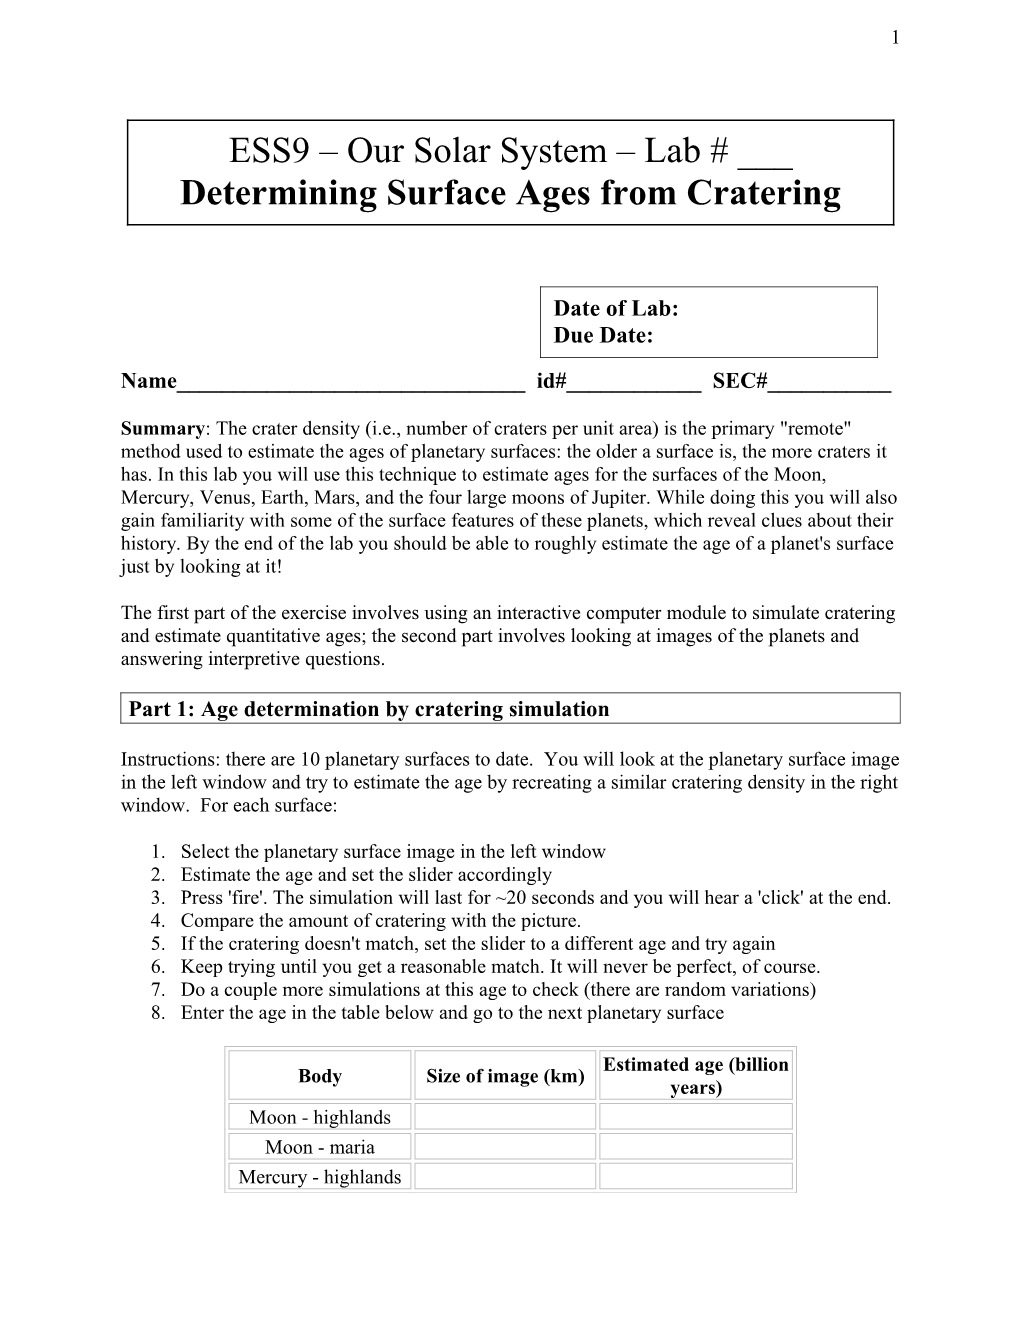 Part 1: Age Determination by Cratering Simulation